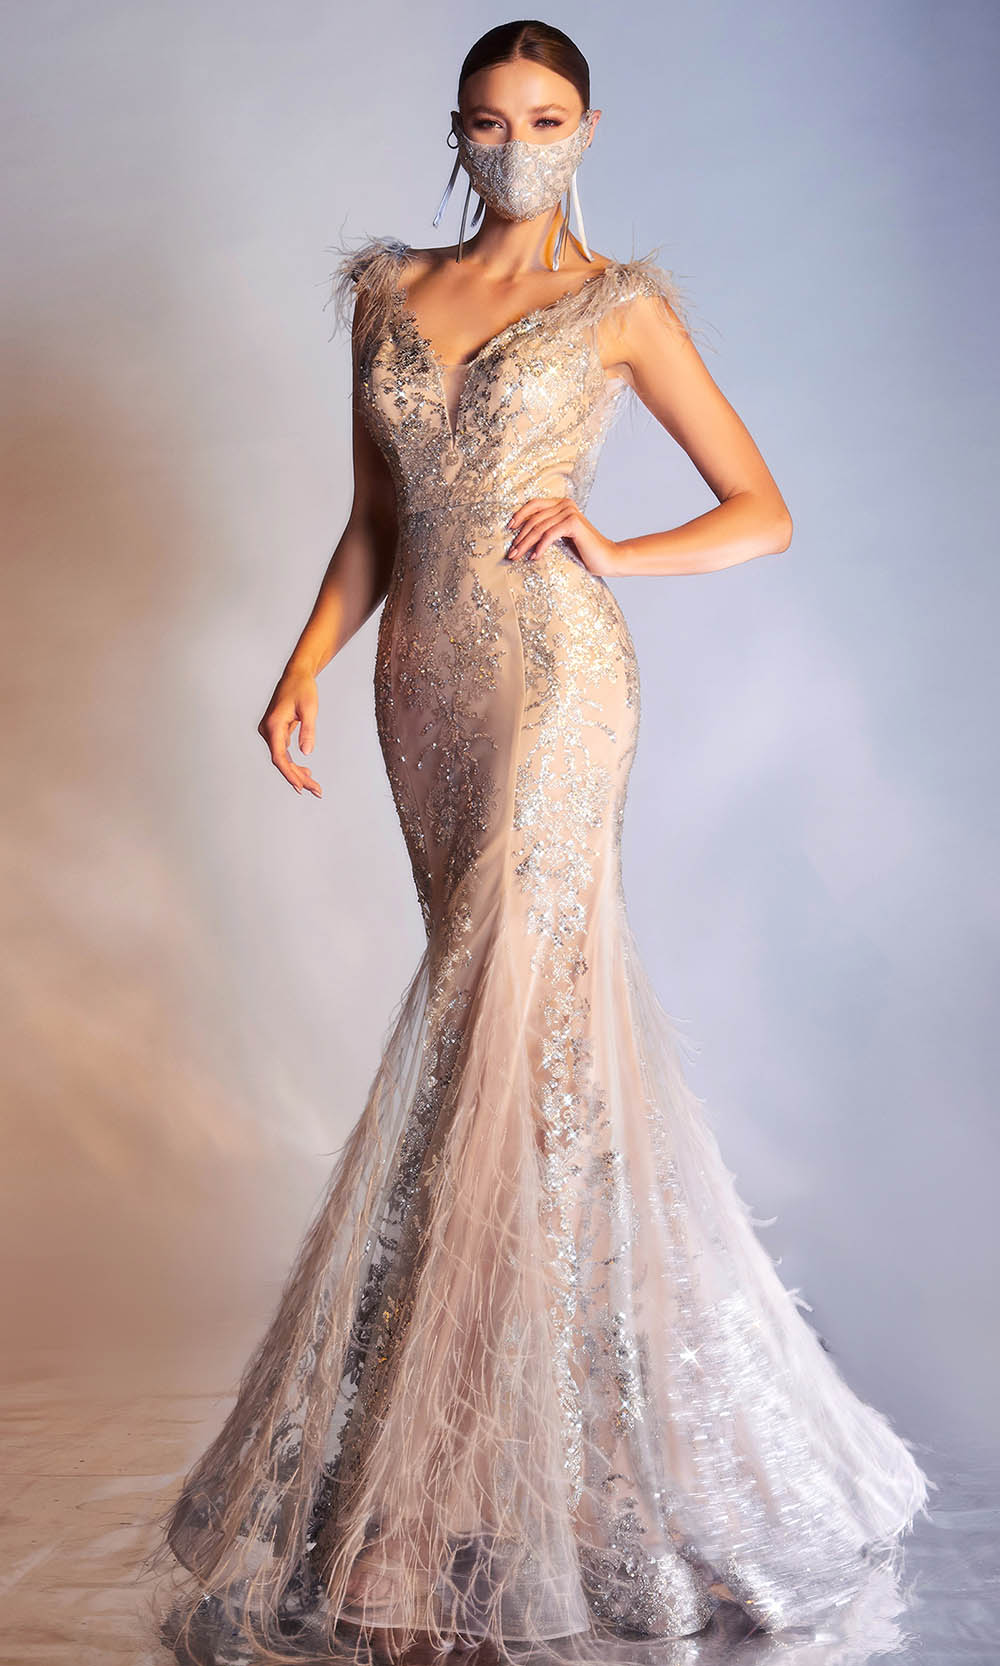 Ladivine - C57 Embellished Deep V Neck Mermaid Gown In Silver and Gray